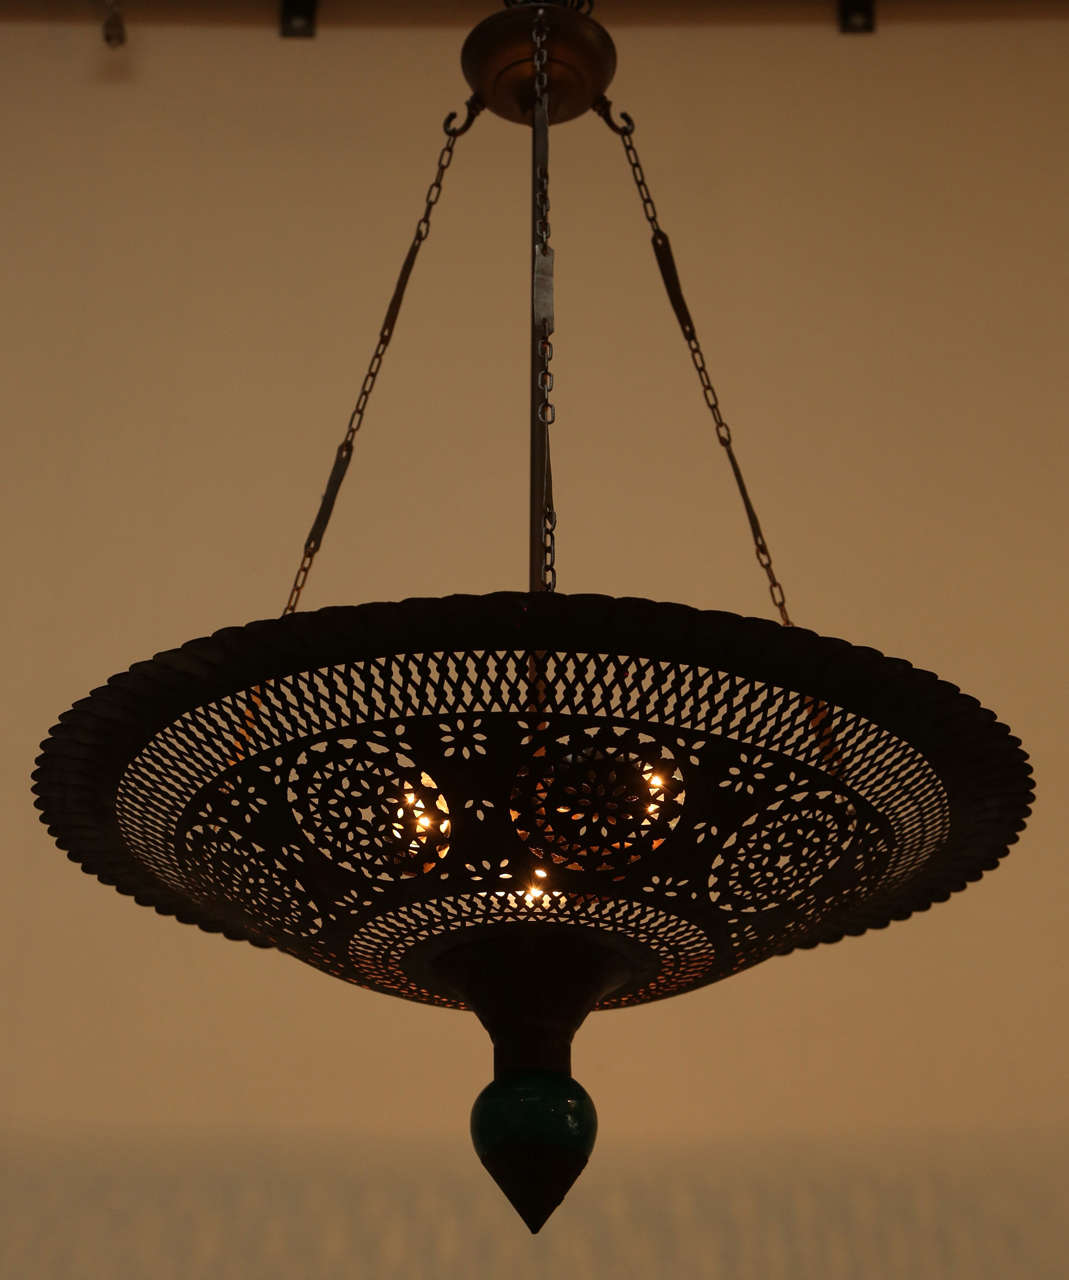 Moroccan hanging chandelier handmade with nice intricate geometric fretwork cut-out and a green ceramic porcelain final.
Rewire with three lights, ready to hang.

 Size is 43